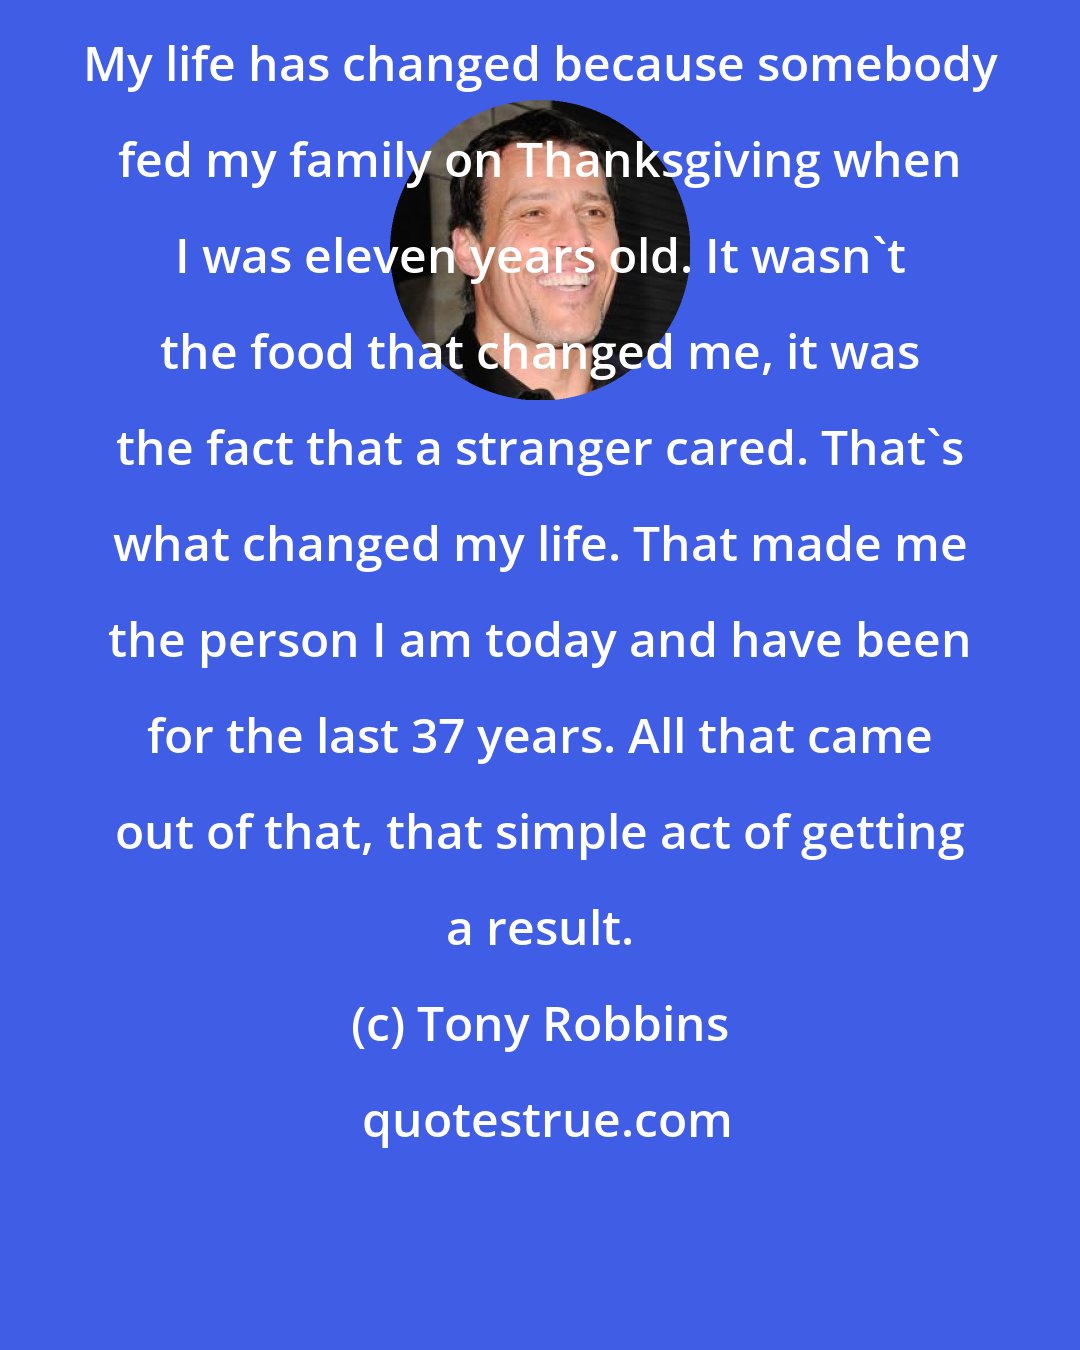 Tony Robbins: My life has changed because somebody fed my family on Thanksgiving when I was eleven years old. It wasn't the food that changed me, it was the fact that a stranger cared. That's what changed my life. That made me the person I am today and have been for the last 37 years. All that came out of that, that simple act of getting a result.